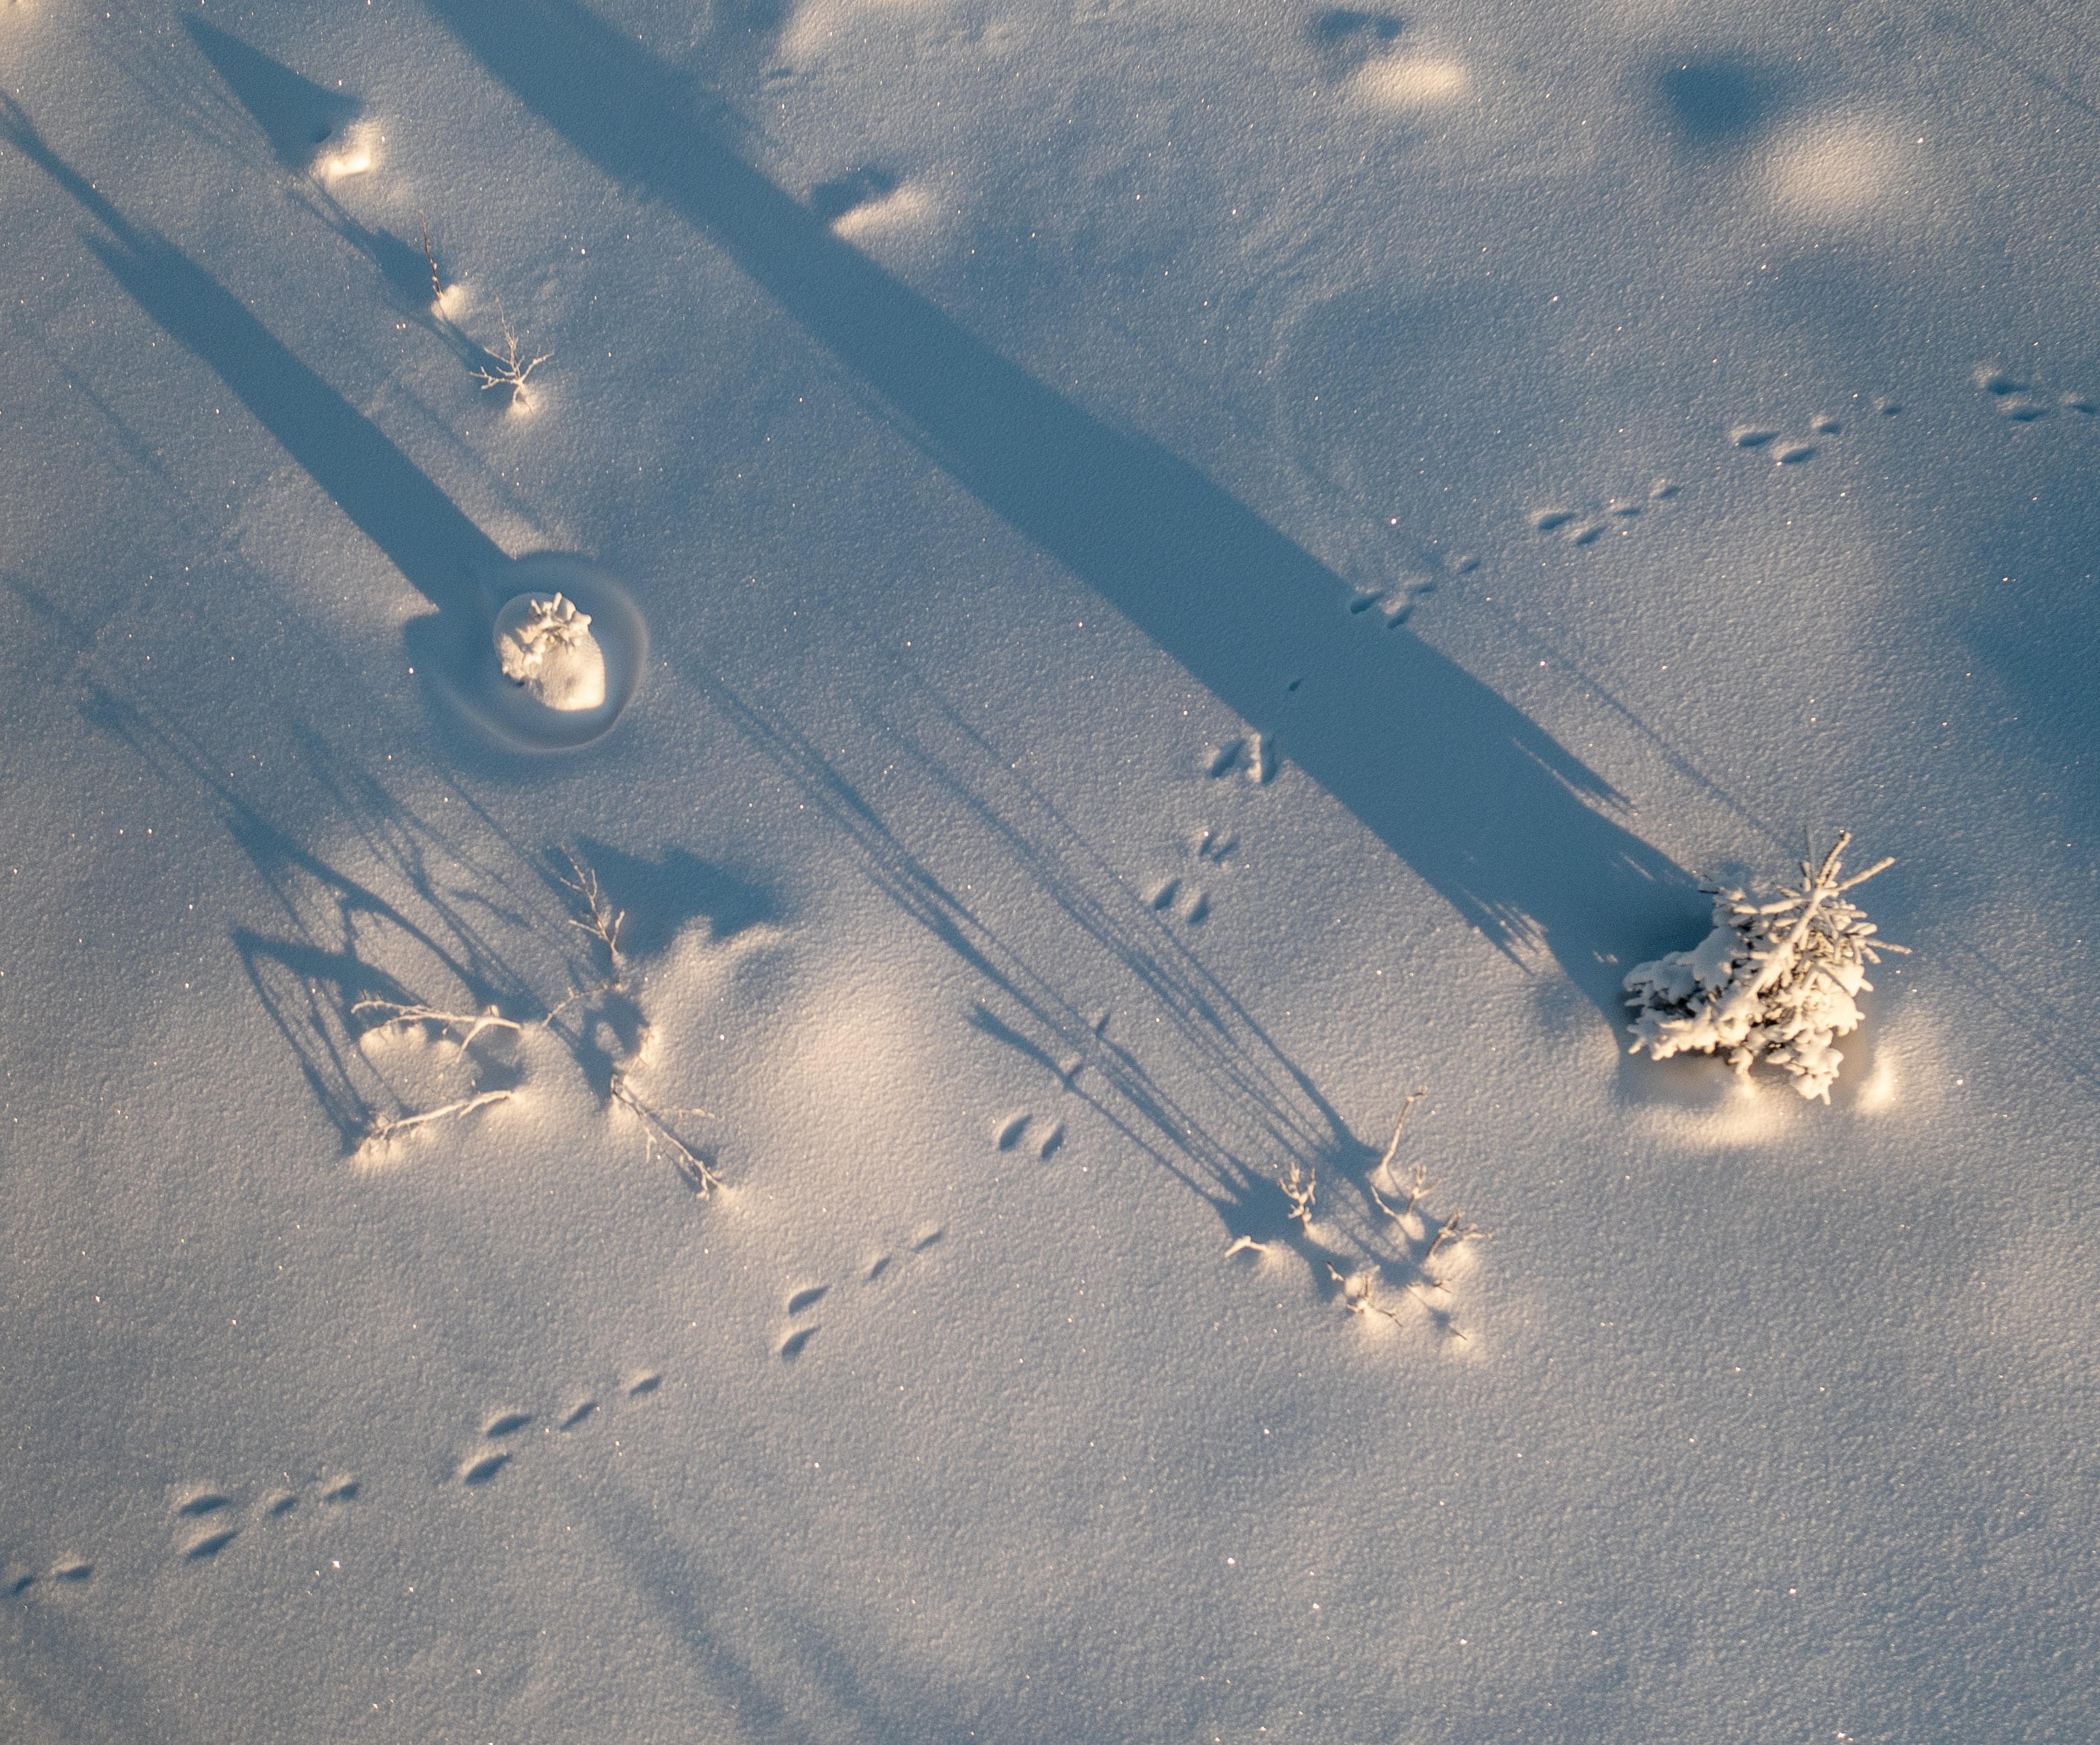 Hare tracks cross a snowy landscape. Winter wildlife tracking invites us to observe how an animal interacts with the larger habitat and other beings that dwell alongside it.